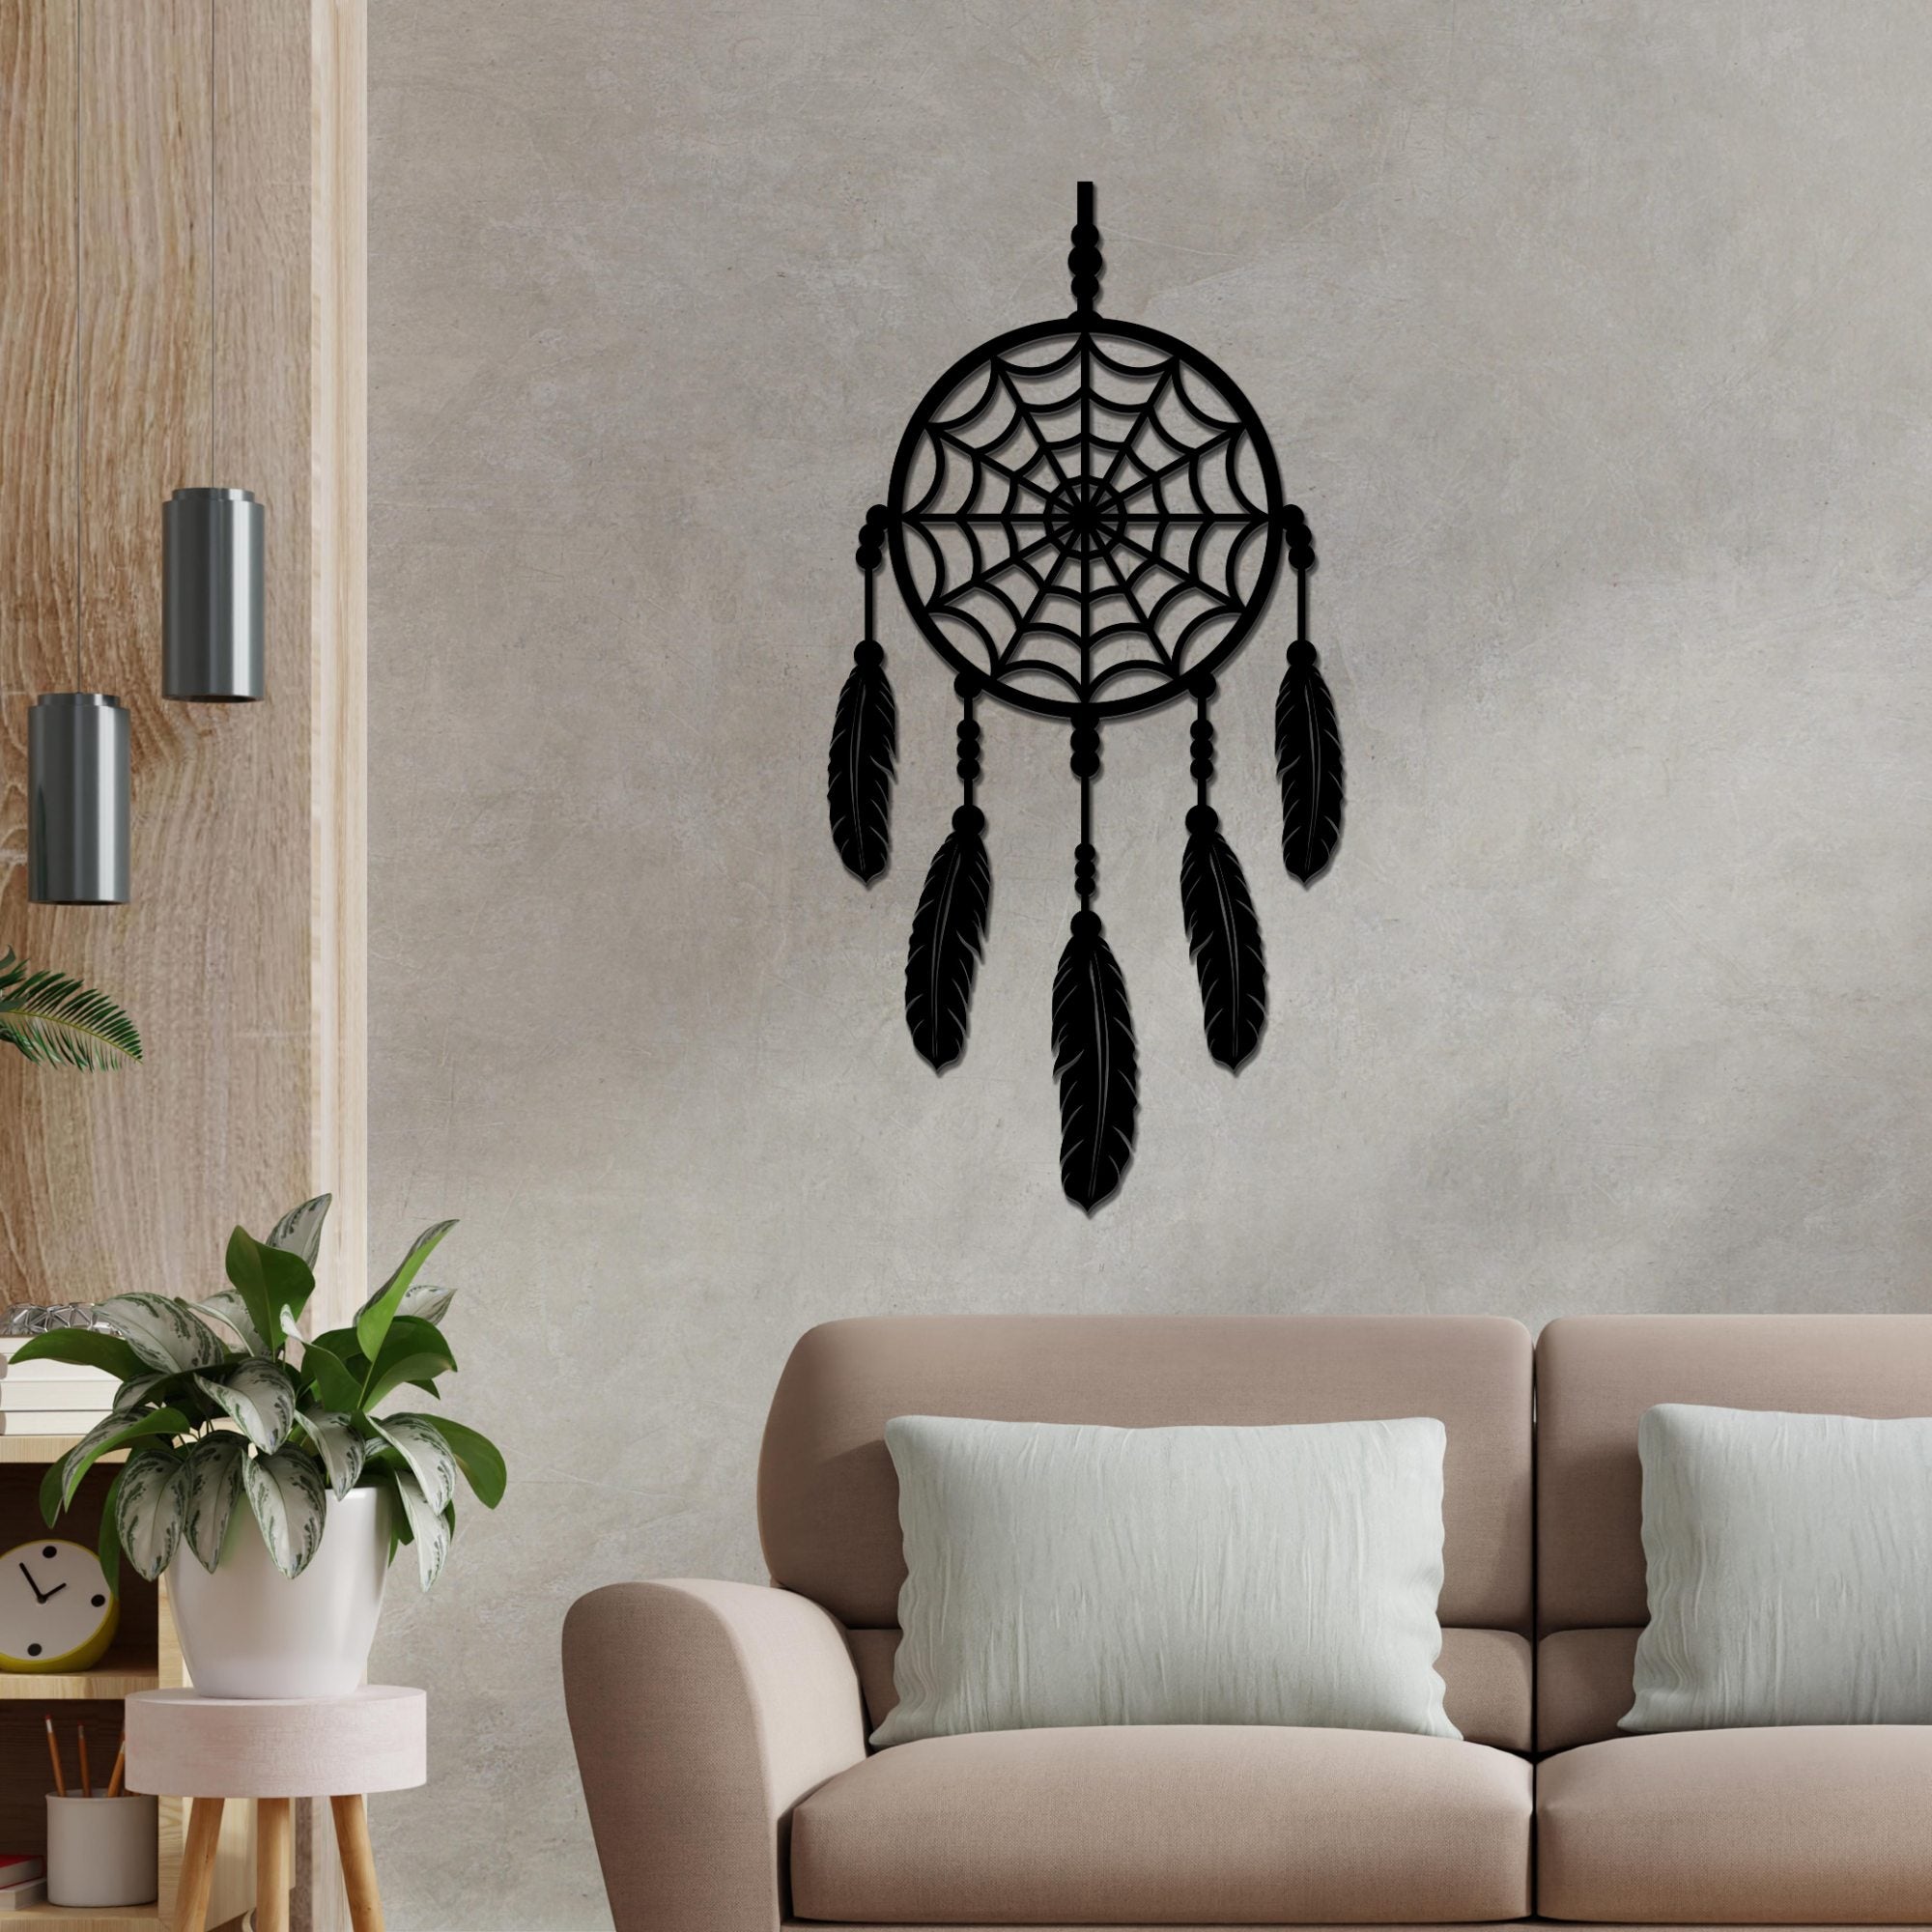 Amazing Dream Catcher with Five Feathers Design Premium Wooden Wall Hanging